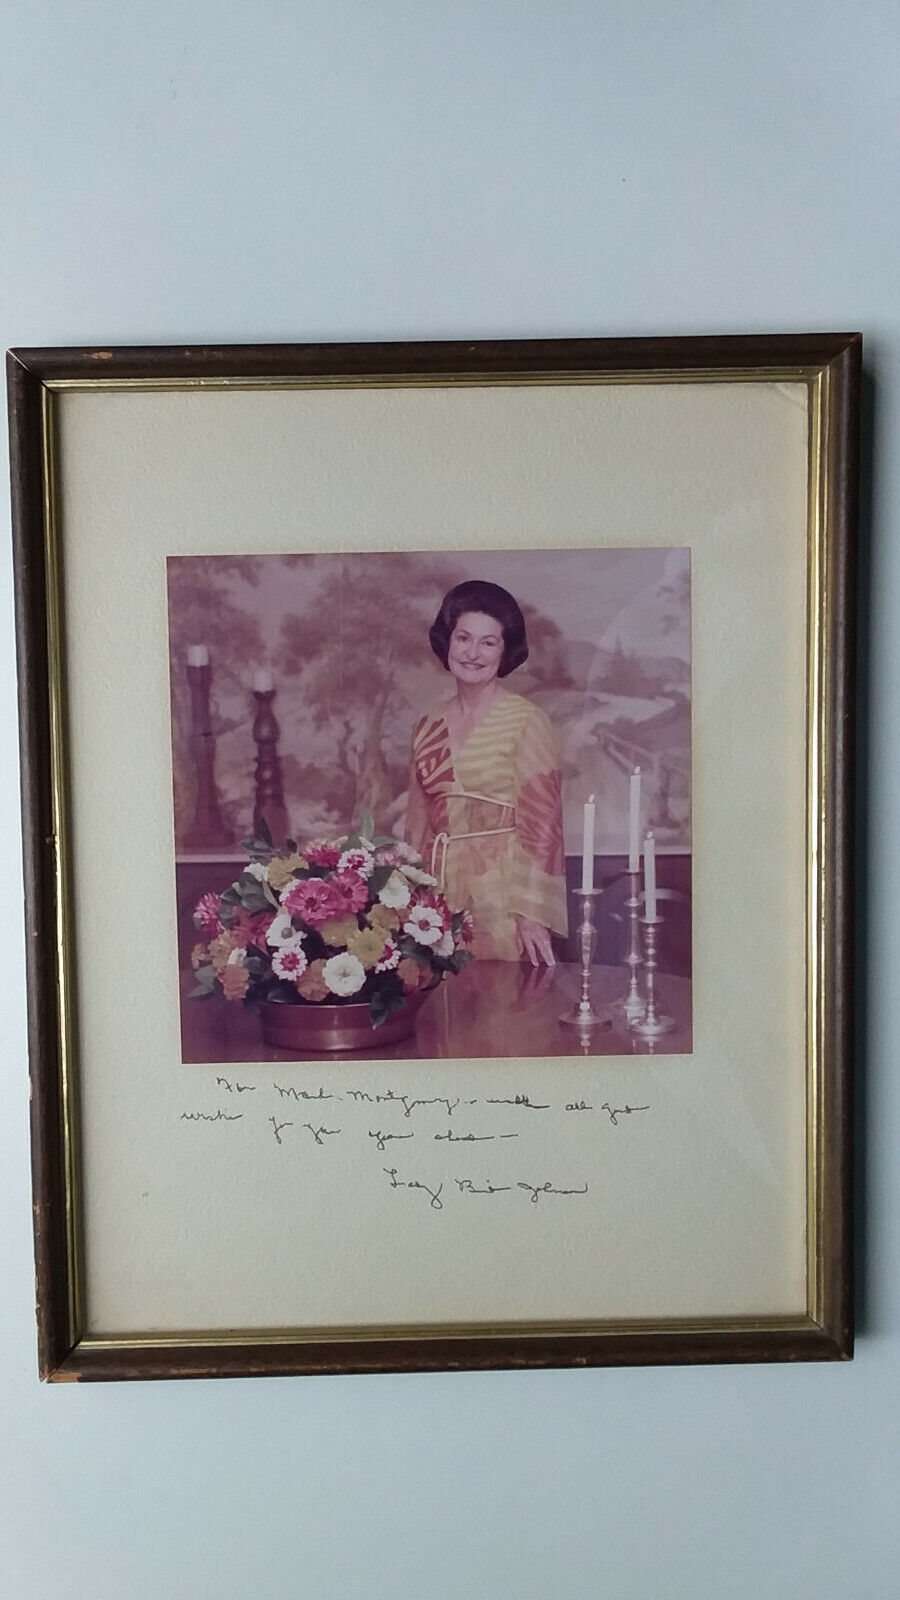 LADY BIRD JOHNSON- 2001-Framed portrait and SIGNED personalized letter  Без бренда - фотография #5